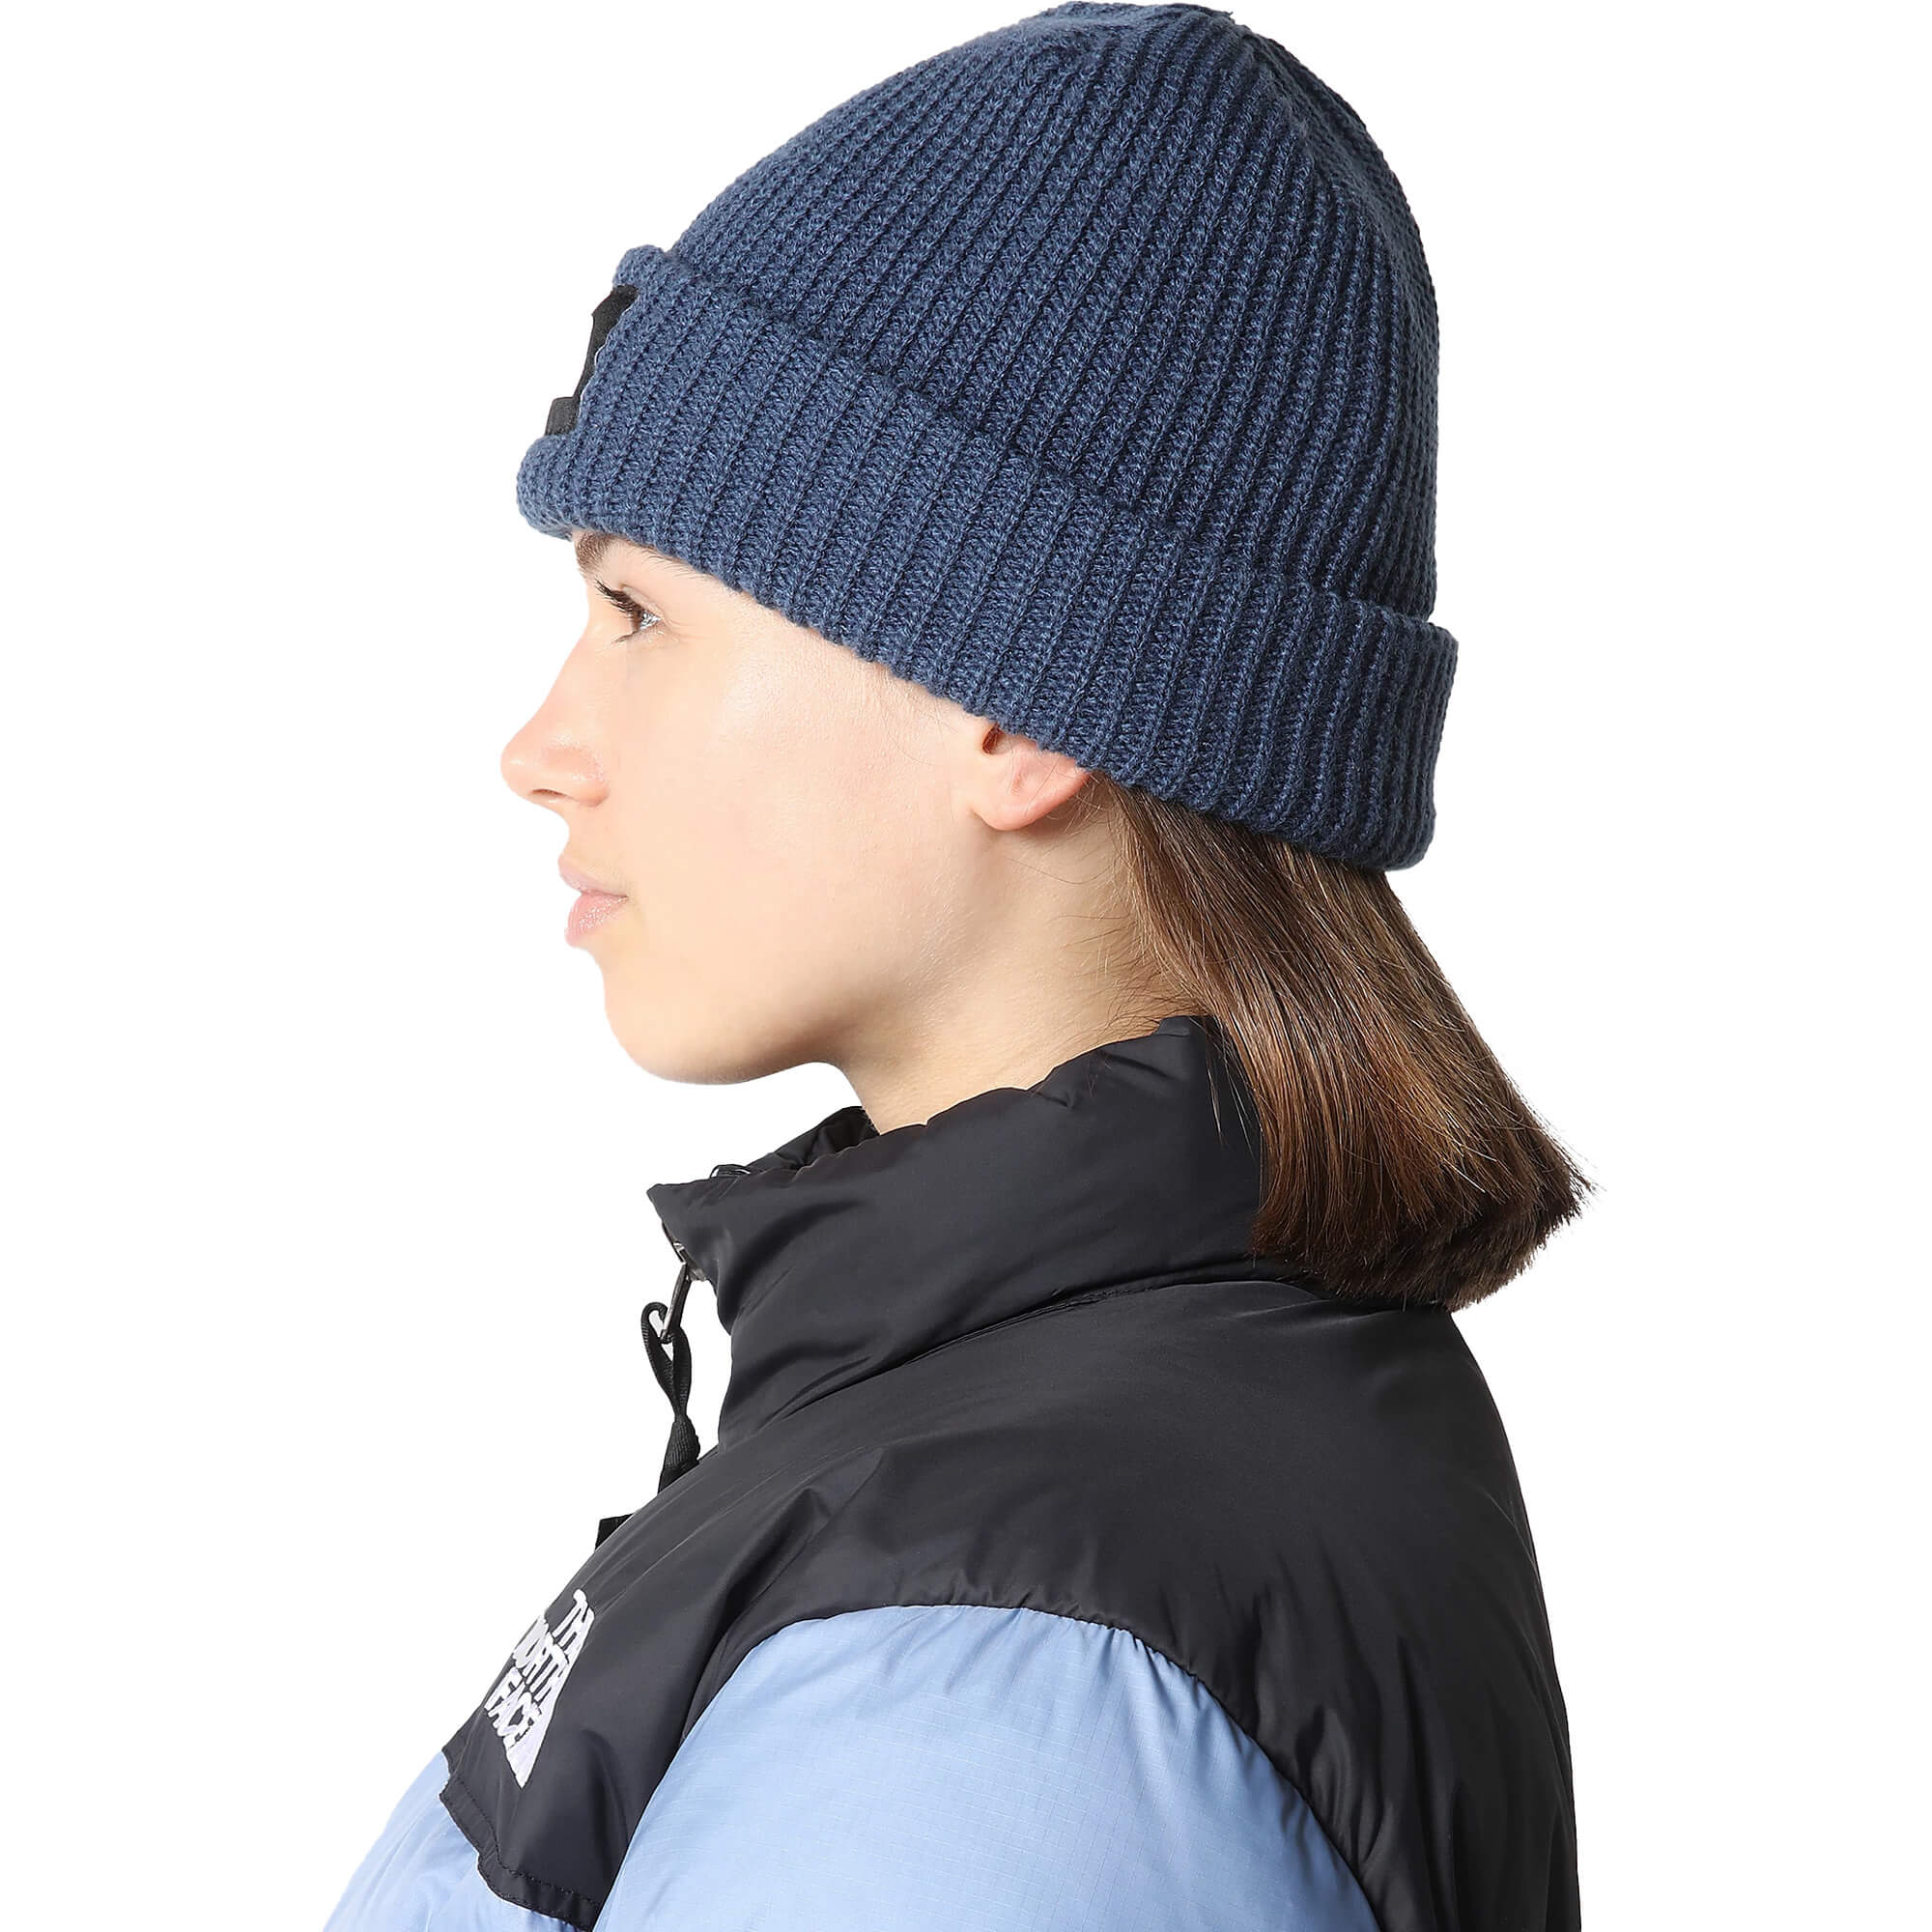 The North Face Salty Dog  Beanie Hat